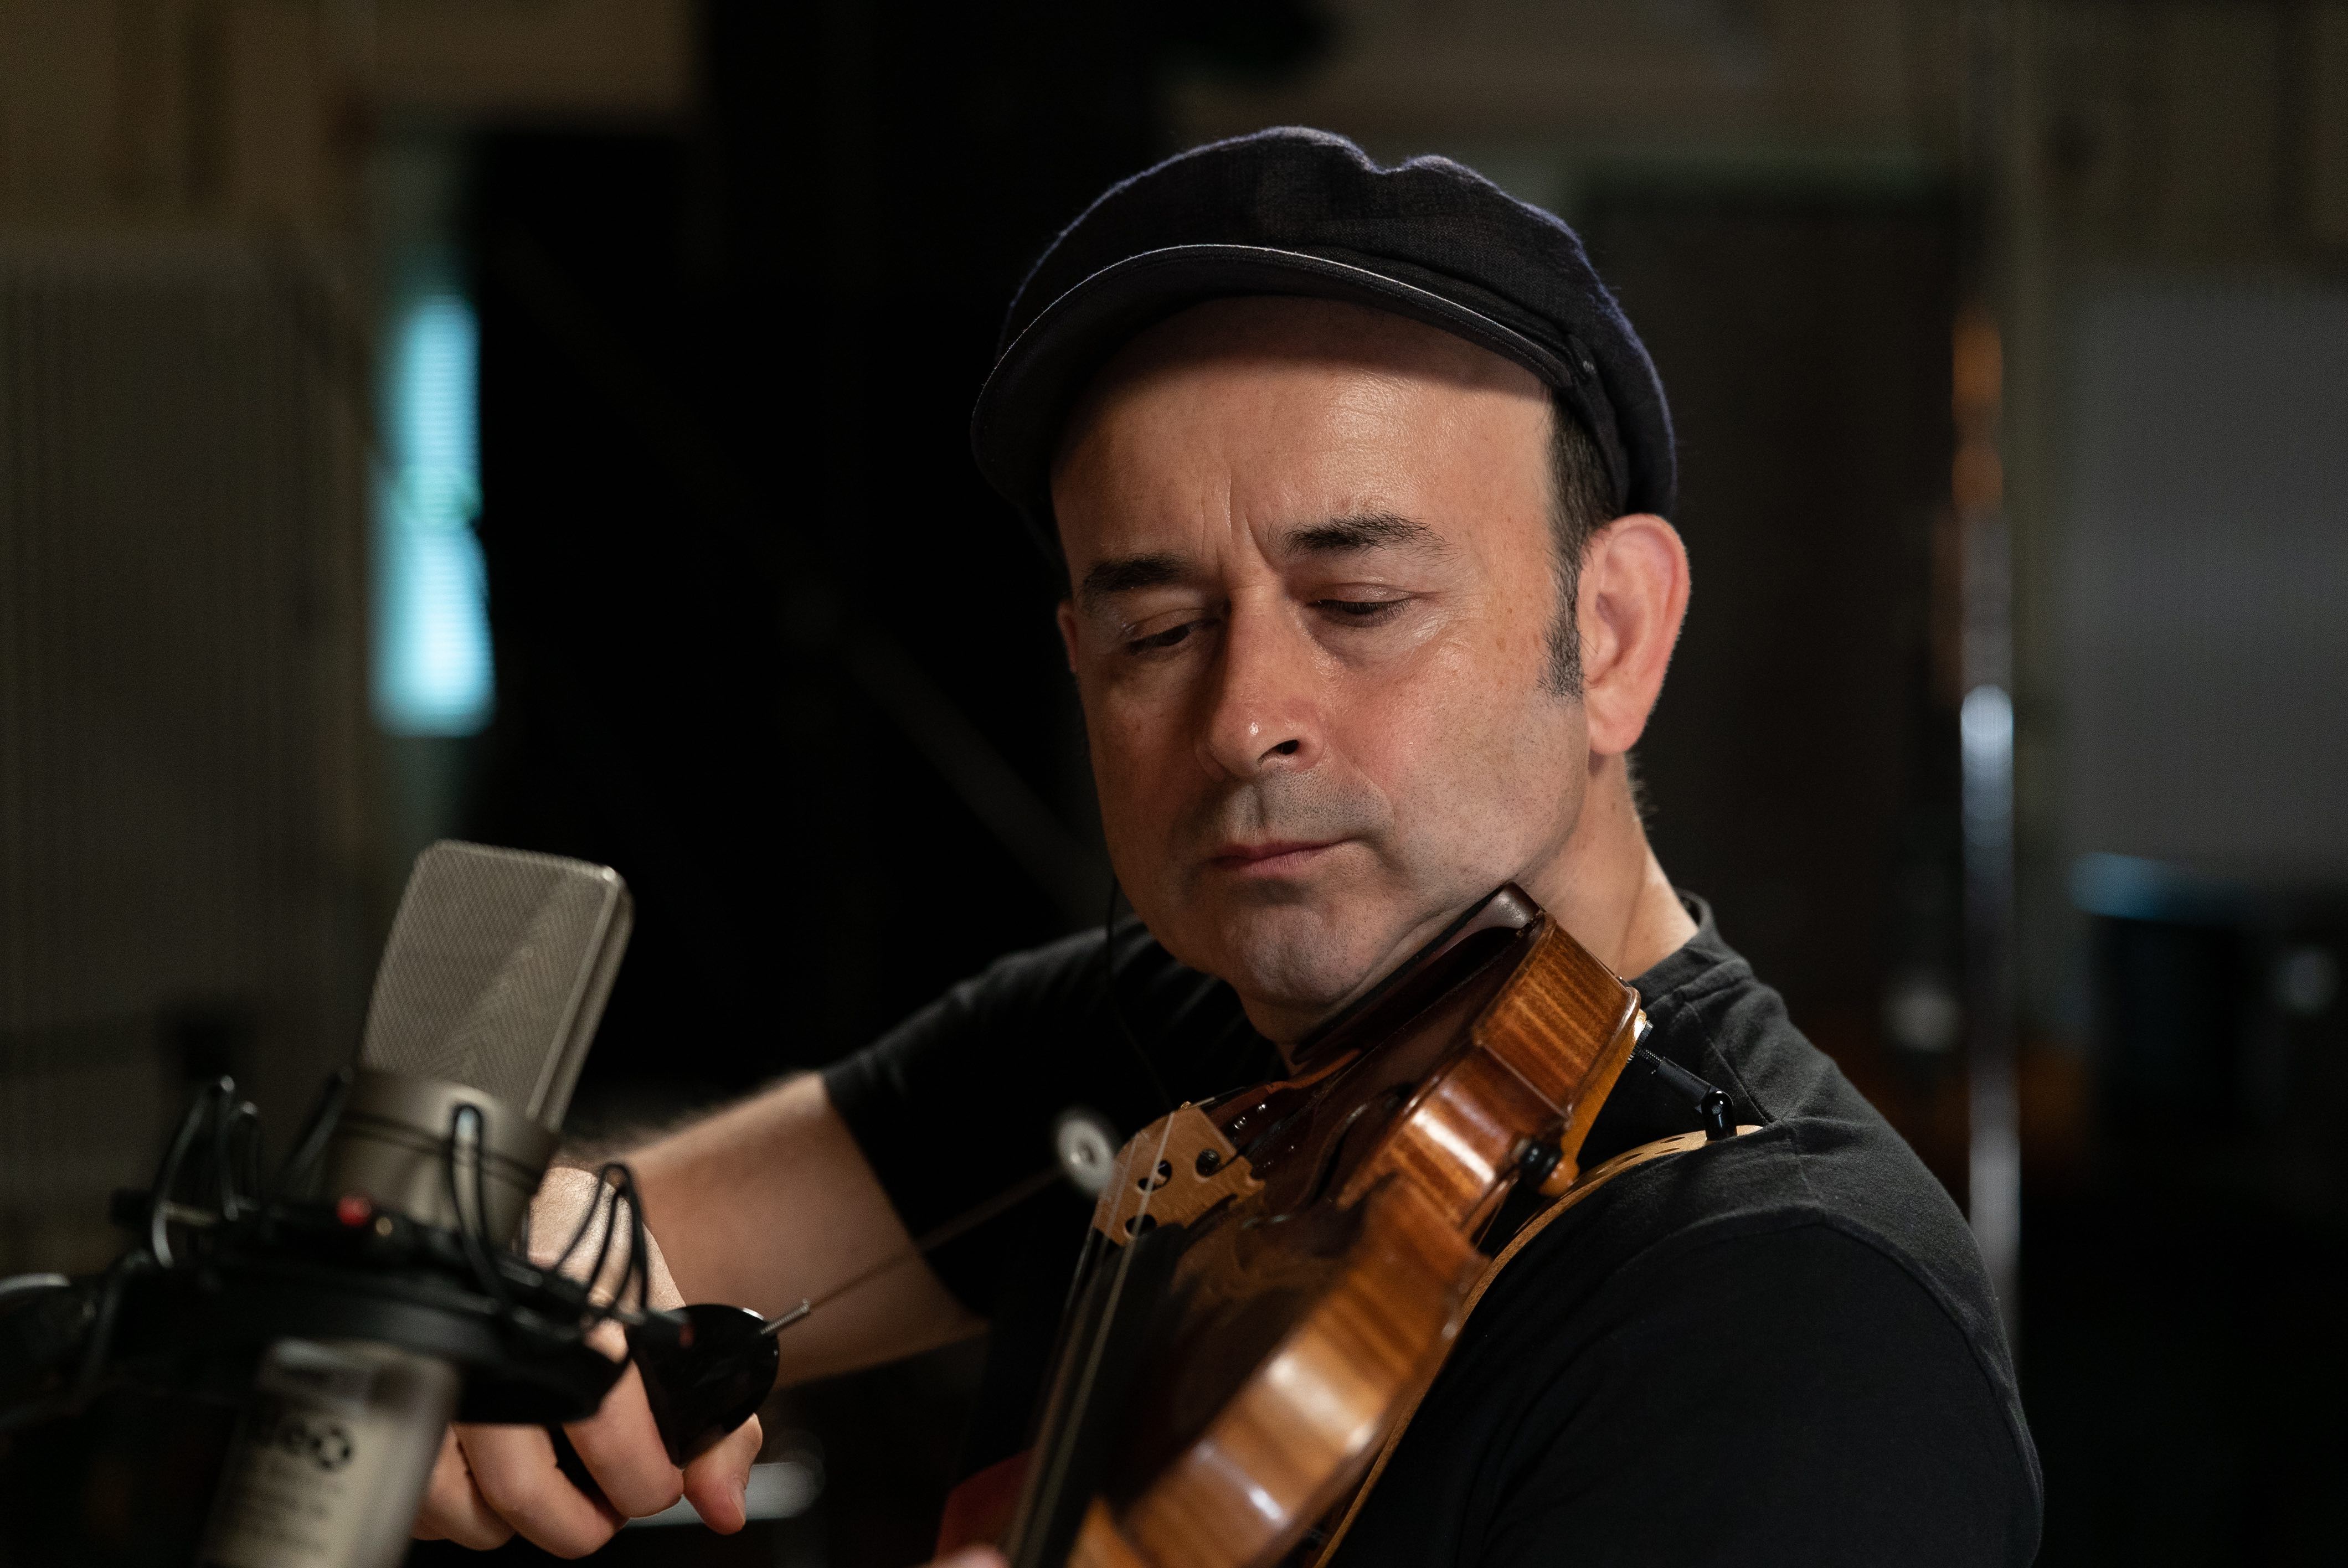 &quot;I have always explored ways of trying to make the violin sound like other instruments. It&#x27;s a fascinating experiment that I&#x27;ve been exploring my whole life.&quot; - Aleksey Igudesman